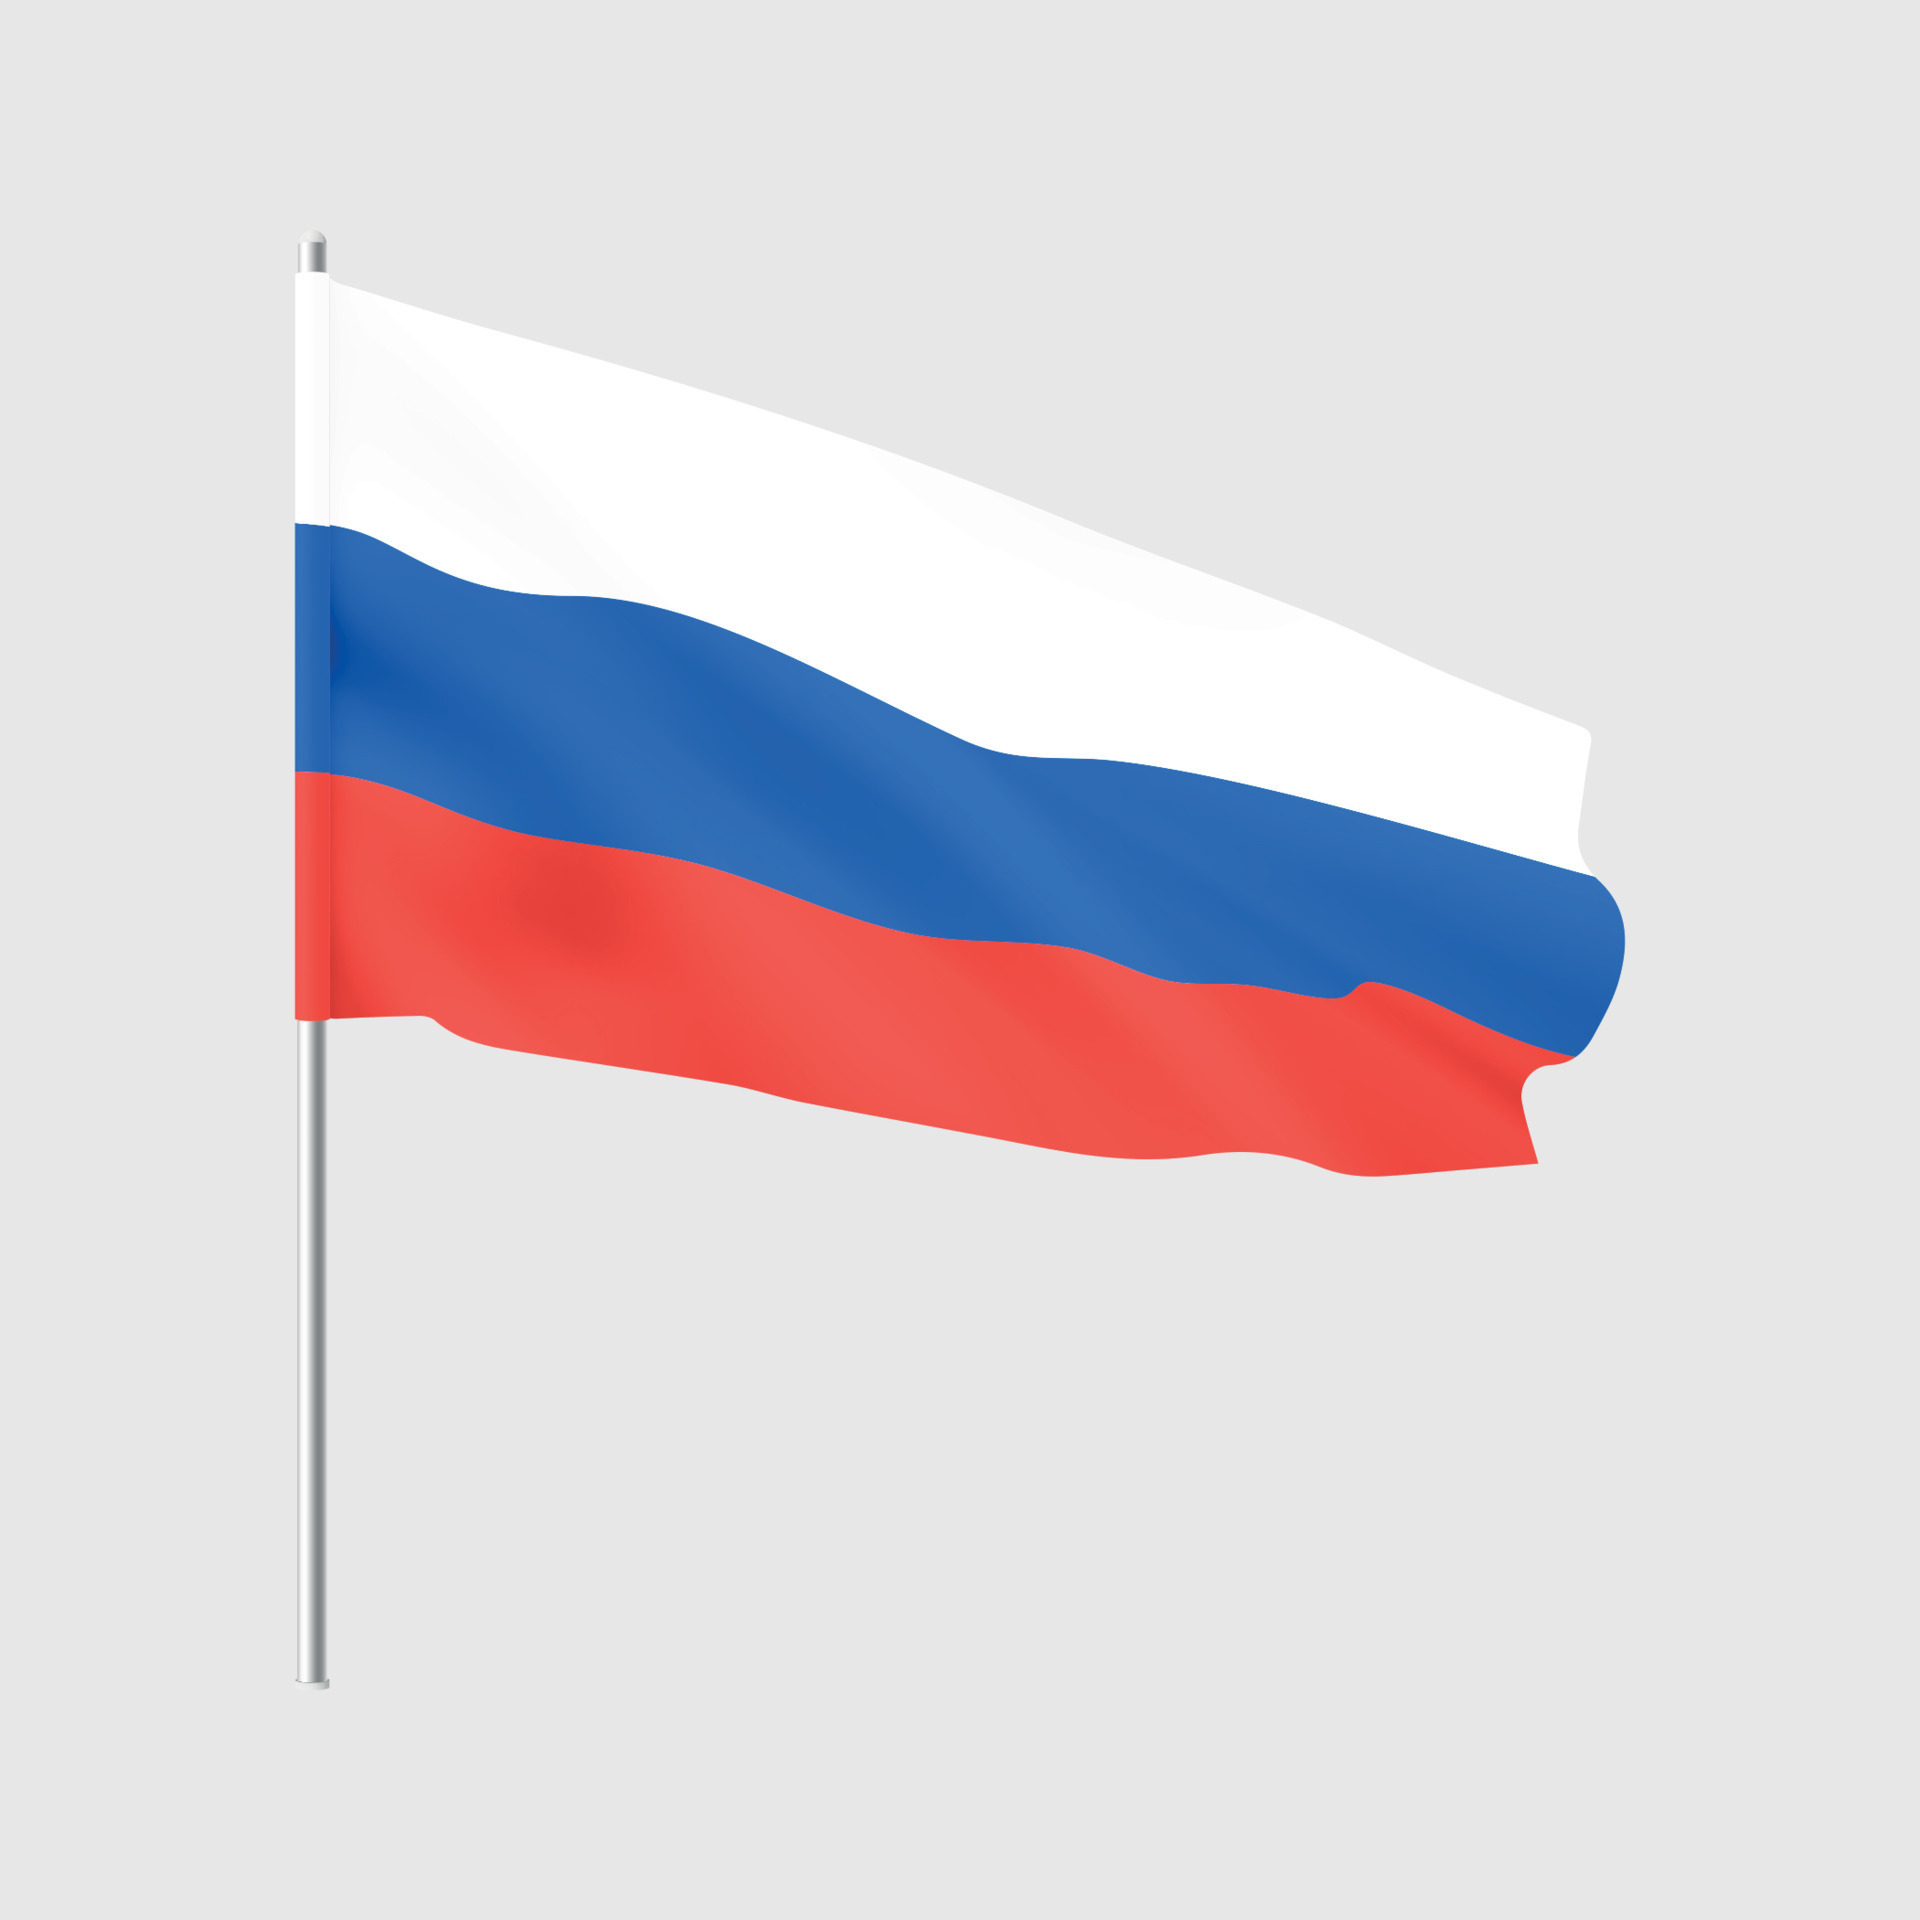 https://static.vecteezy.com/system/resources/previews/007/934/841/original/russia-flag-national-realistic-flag-of-russian-federation-vector.jpg